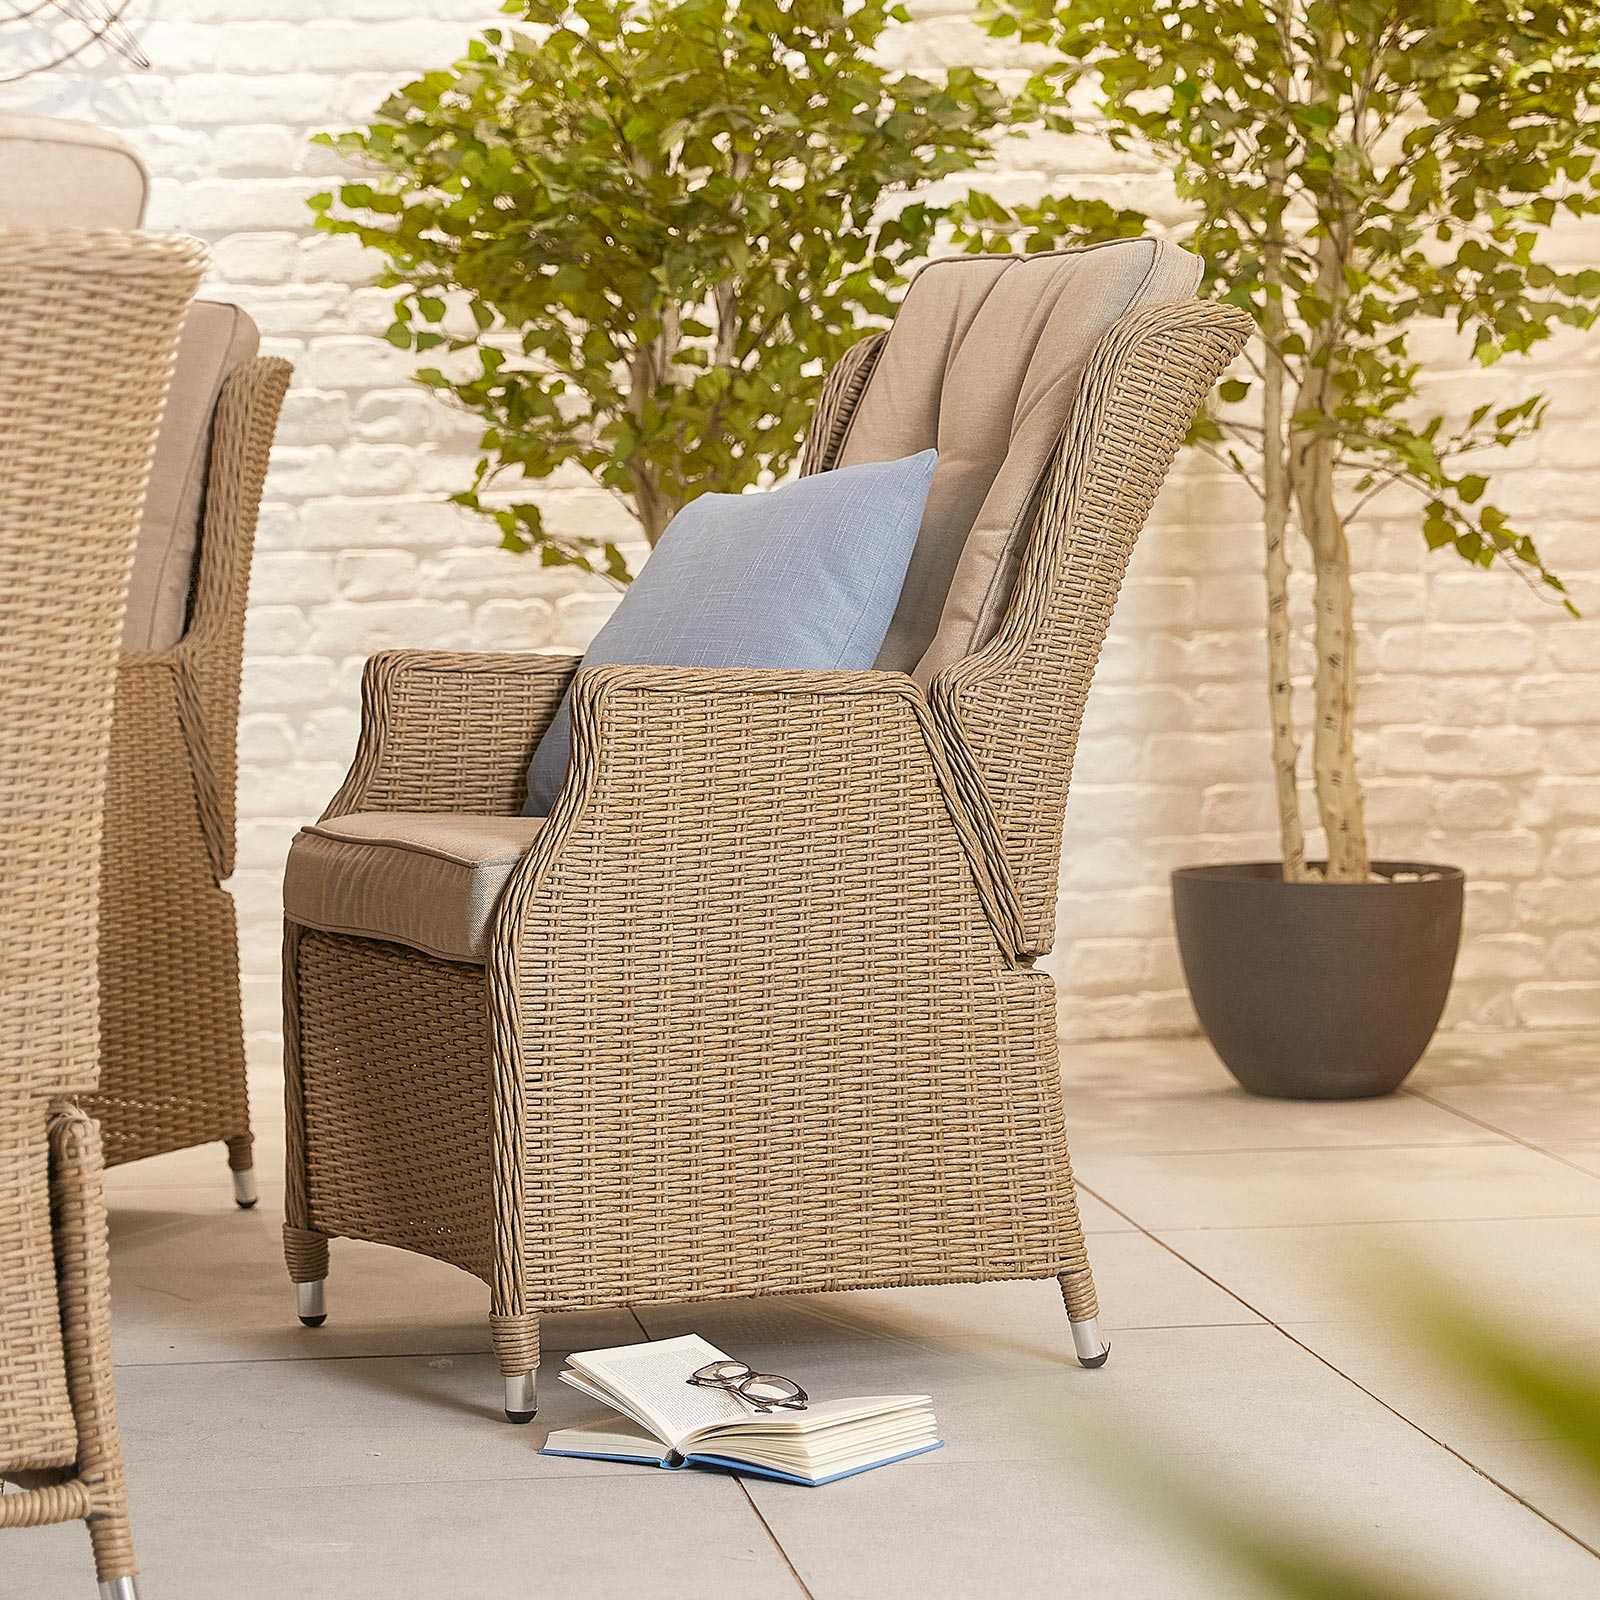 Carolina Outdoor 6 Seat Oval Dining Set by Nova in Willow